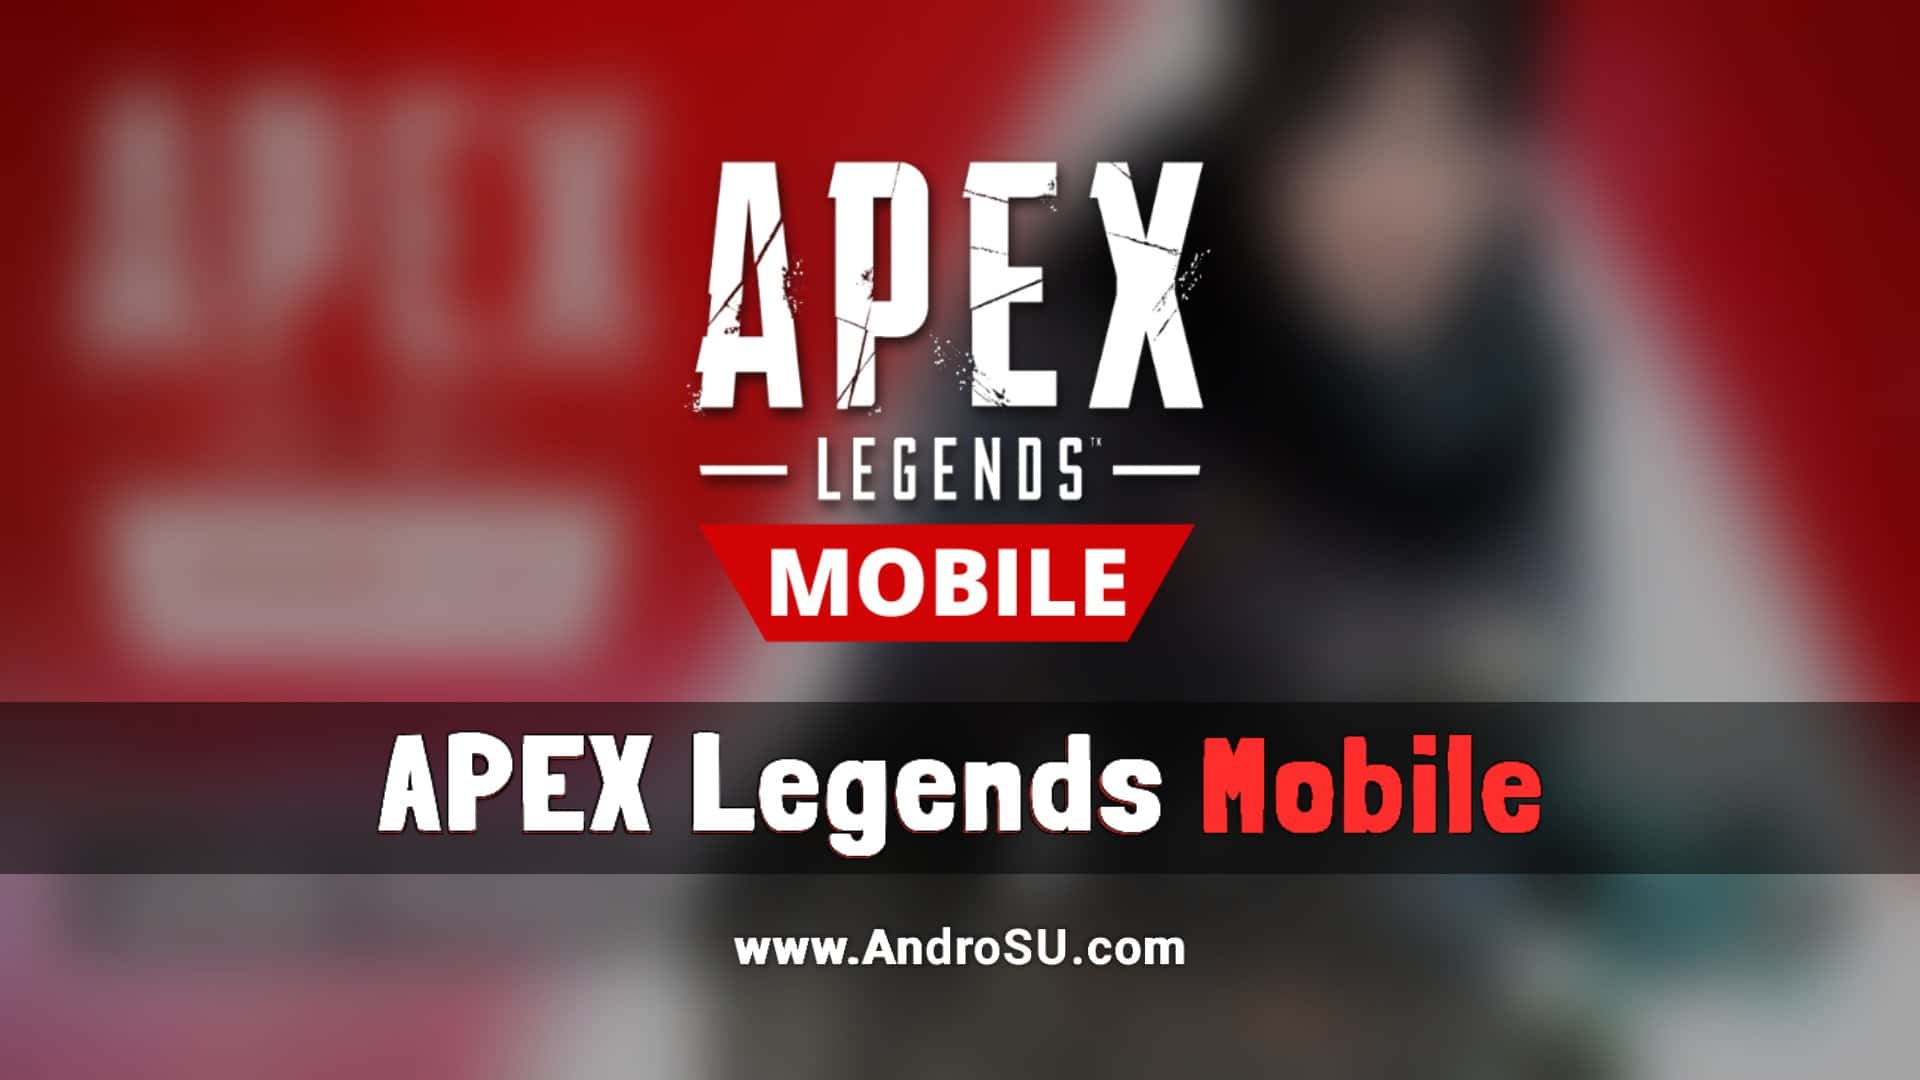 Apex Legends Mobile, Apex Legends Mobile APK, Apex Legends Mobile Android